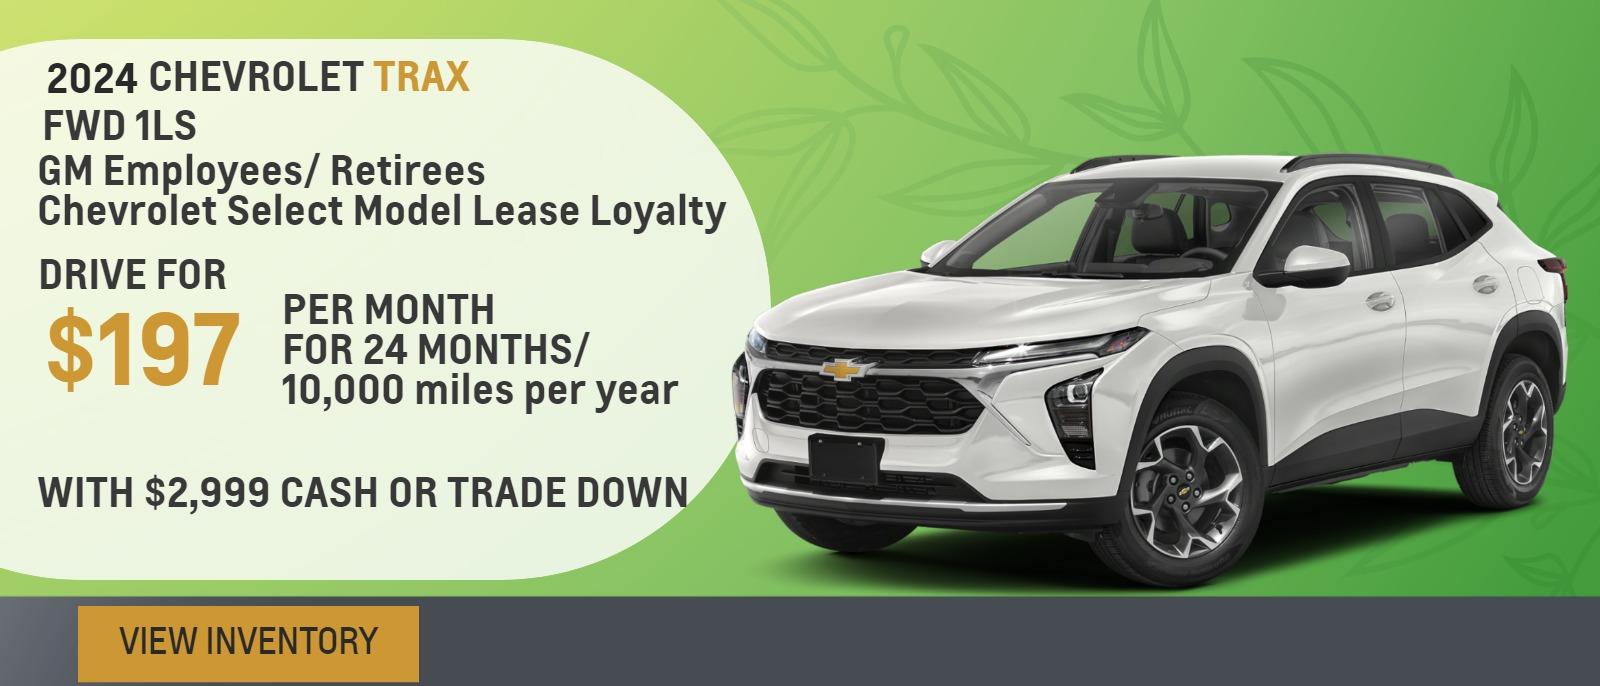 2024 Trax FWD 1LS
GM Employees/ Retirees
Chevrolet Select Model Lease Loyalty

Drive for $197 per month
24 Months / 10,000 miles per year
With $2,999 cash or trade down